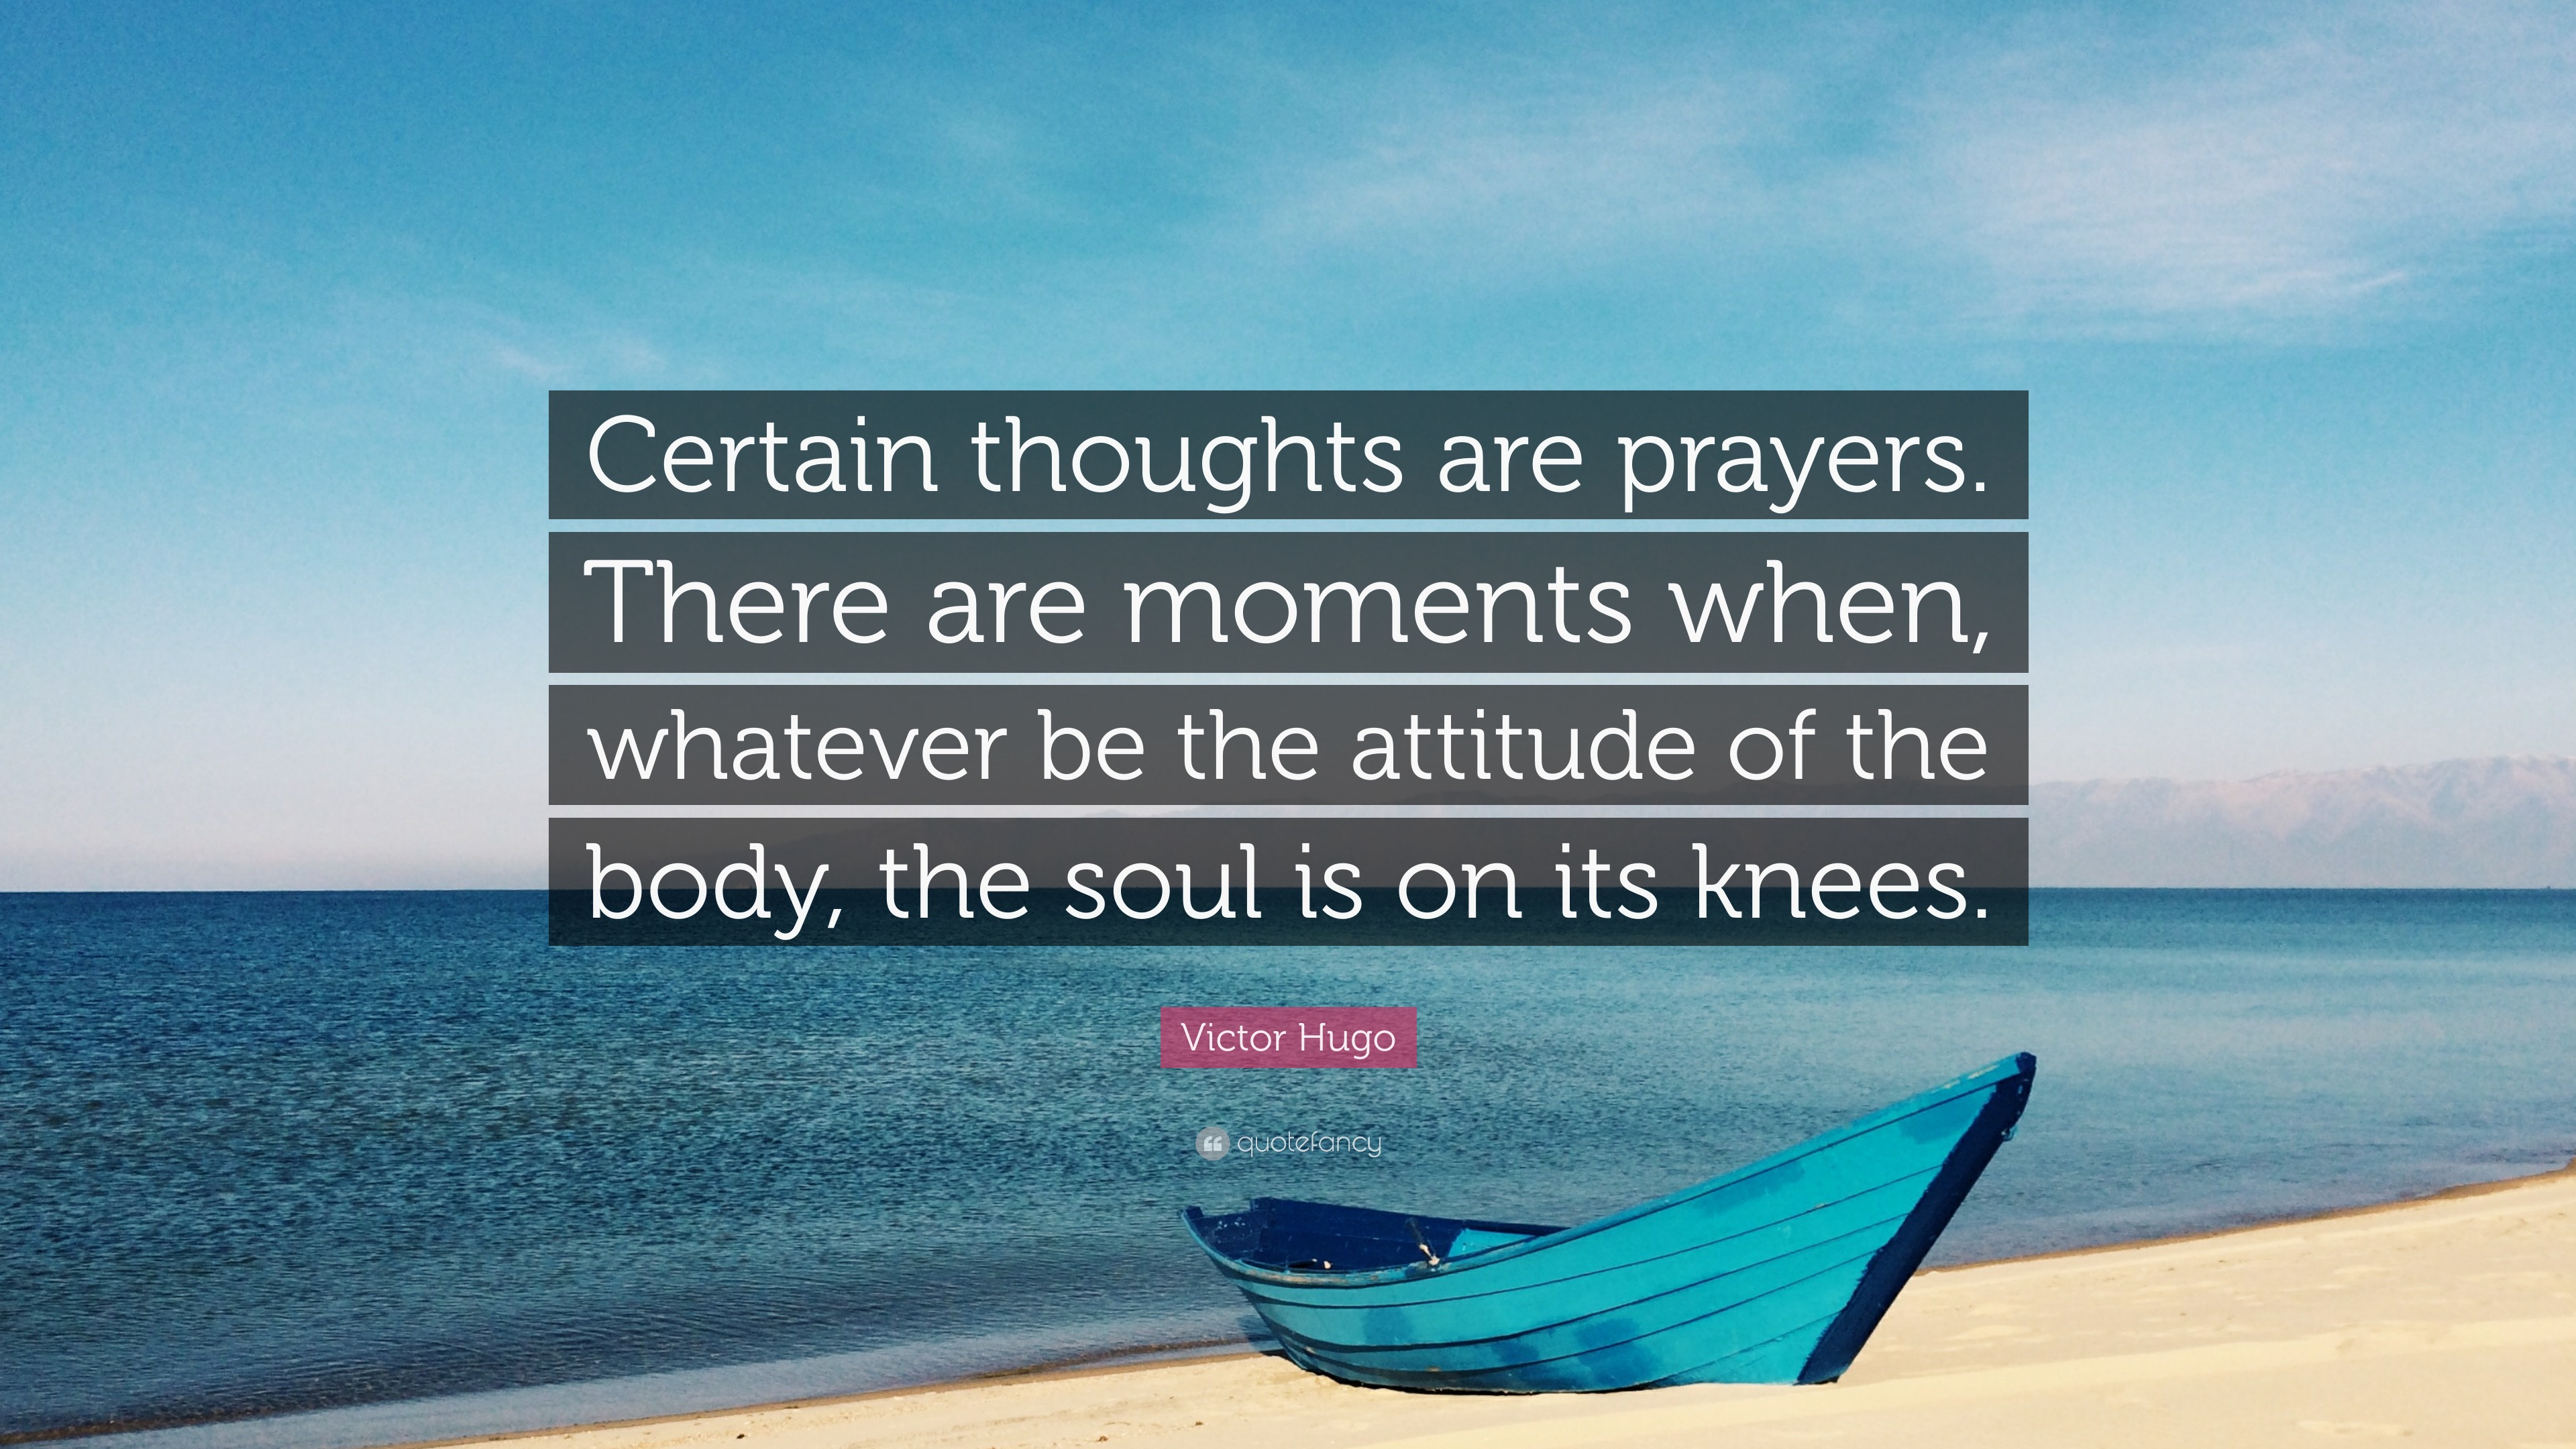 Victor Hugo Quote: “Certain thoughts are prayers. There are moments